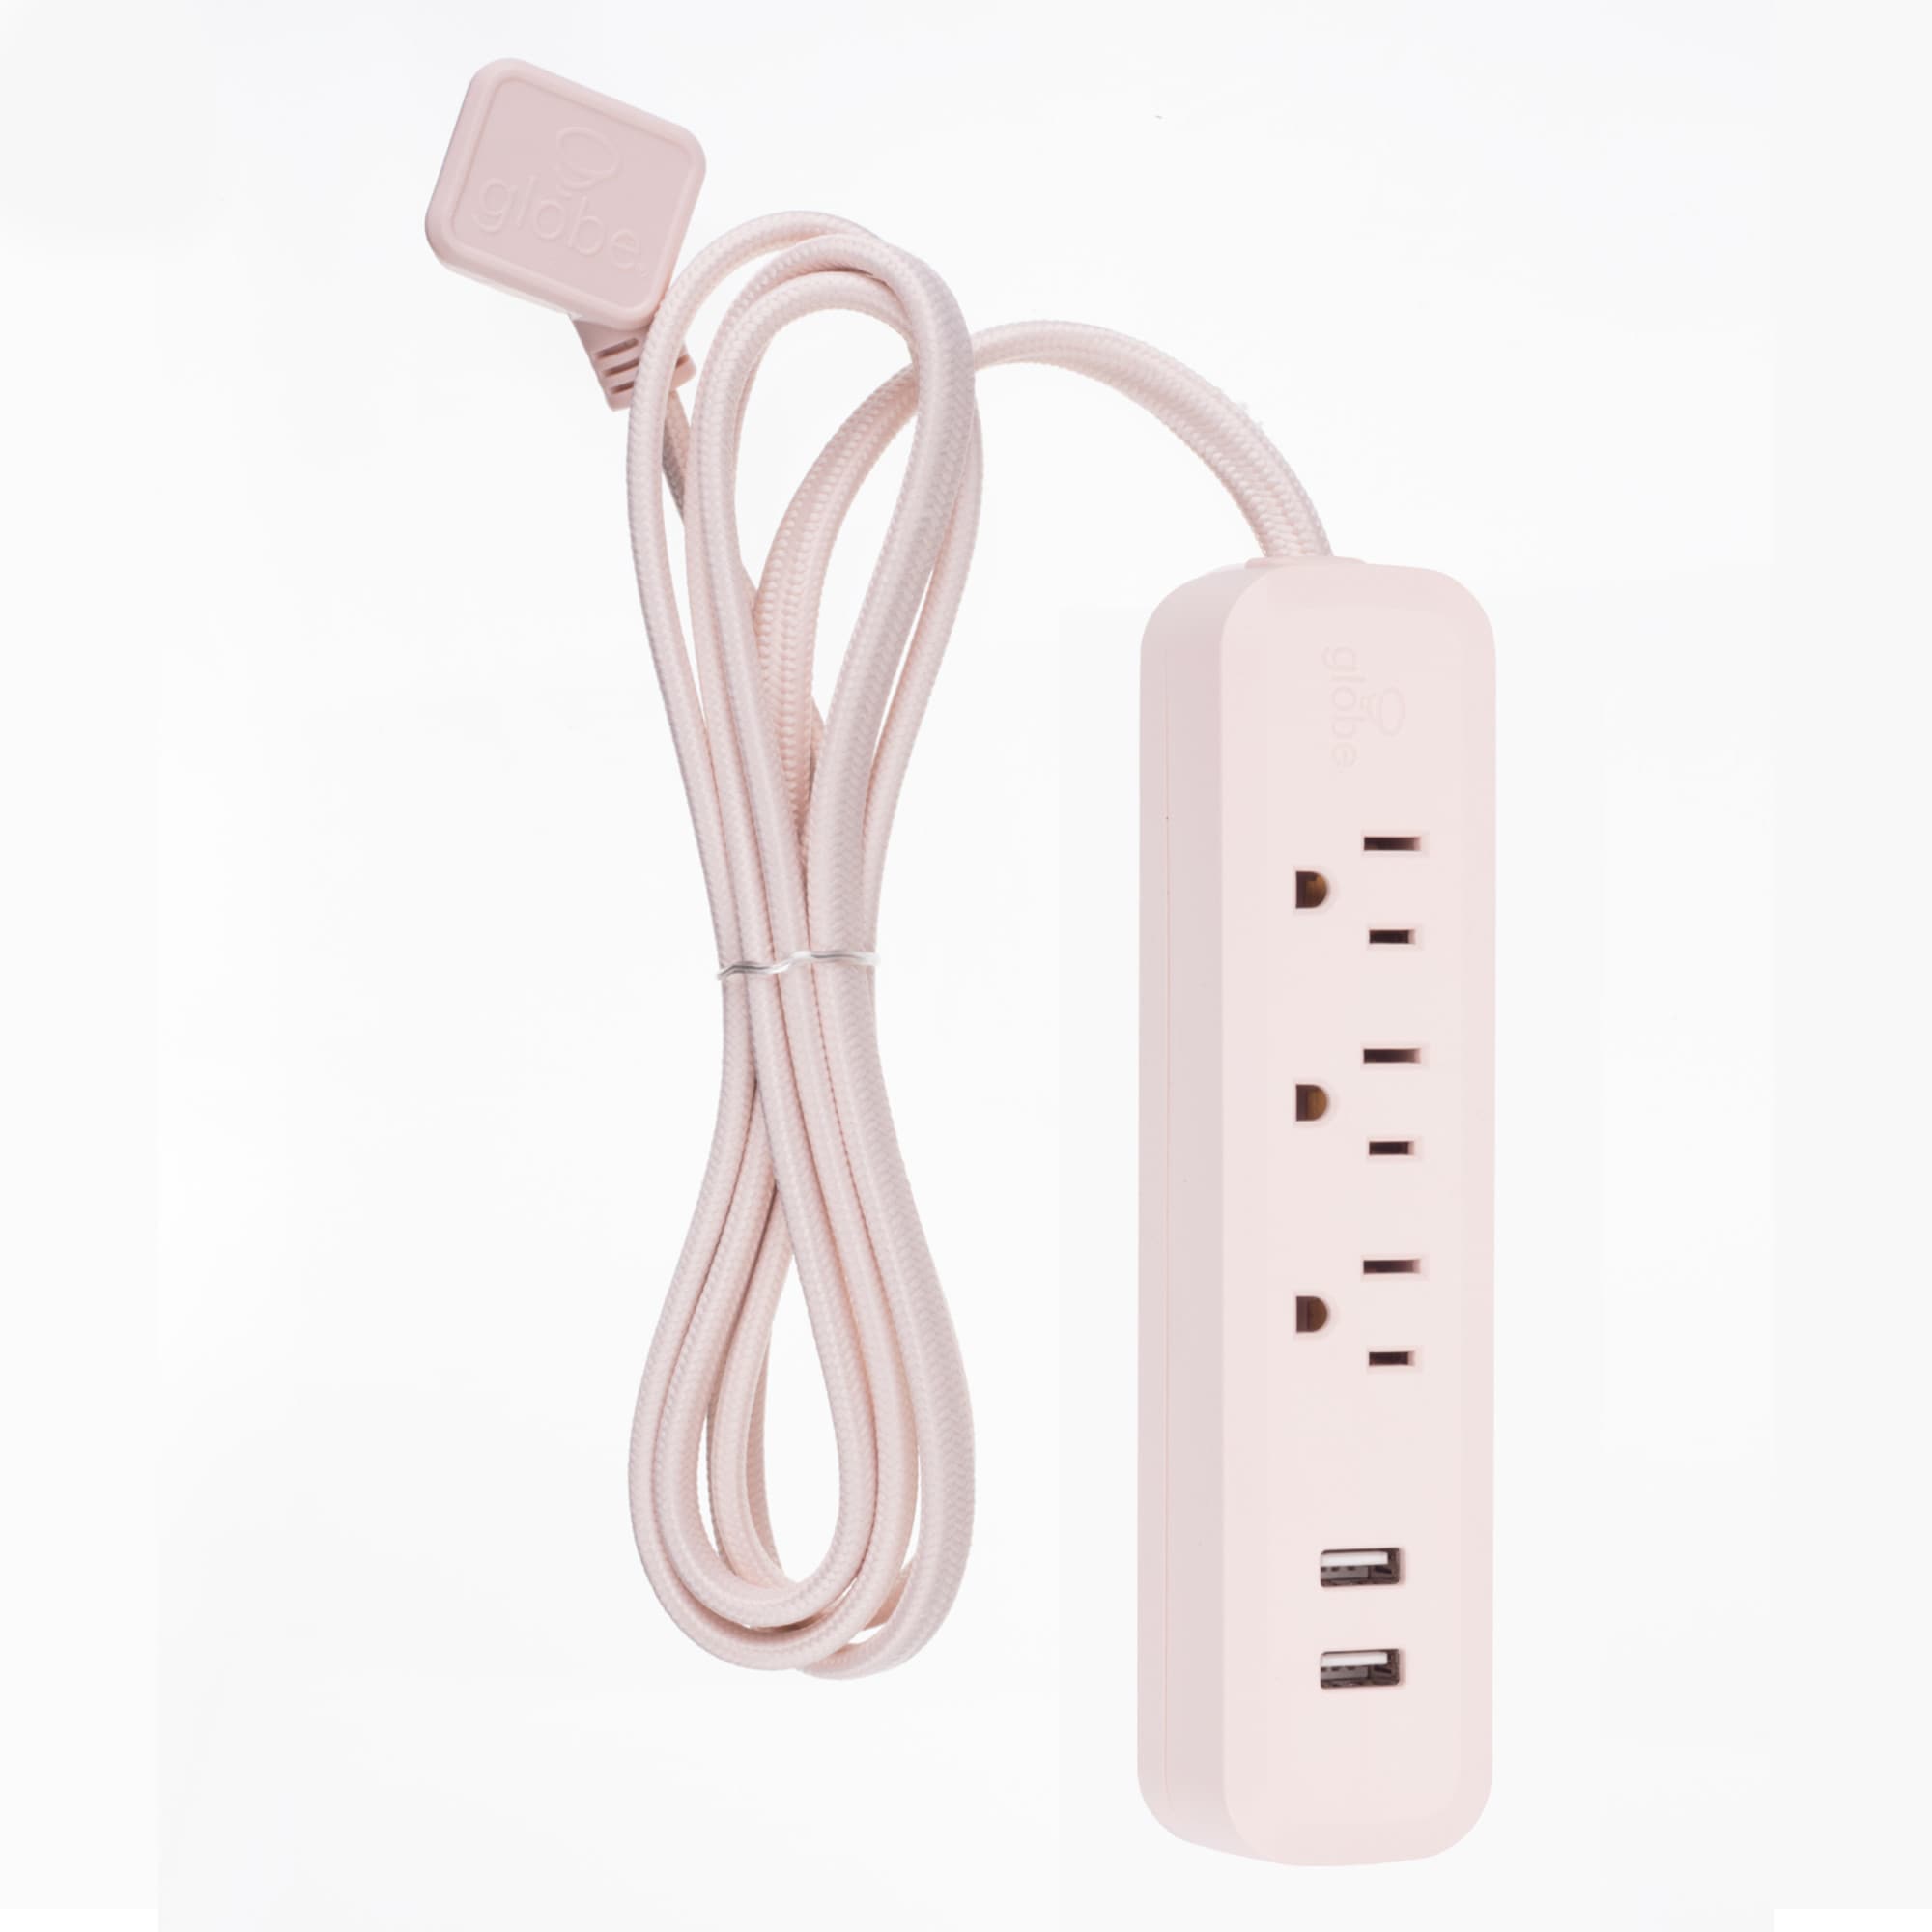 Cable Matters 2-Pack 6 Outlet Surge Protector Power Strip with USB Charging  Ports, 300 Joules with 8 Foot Power Cord in White 